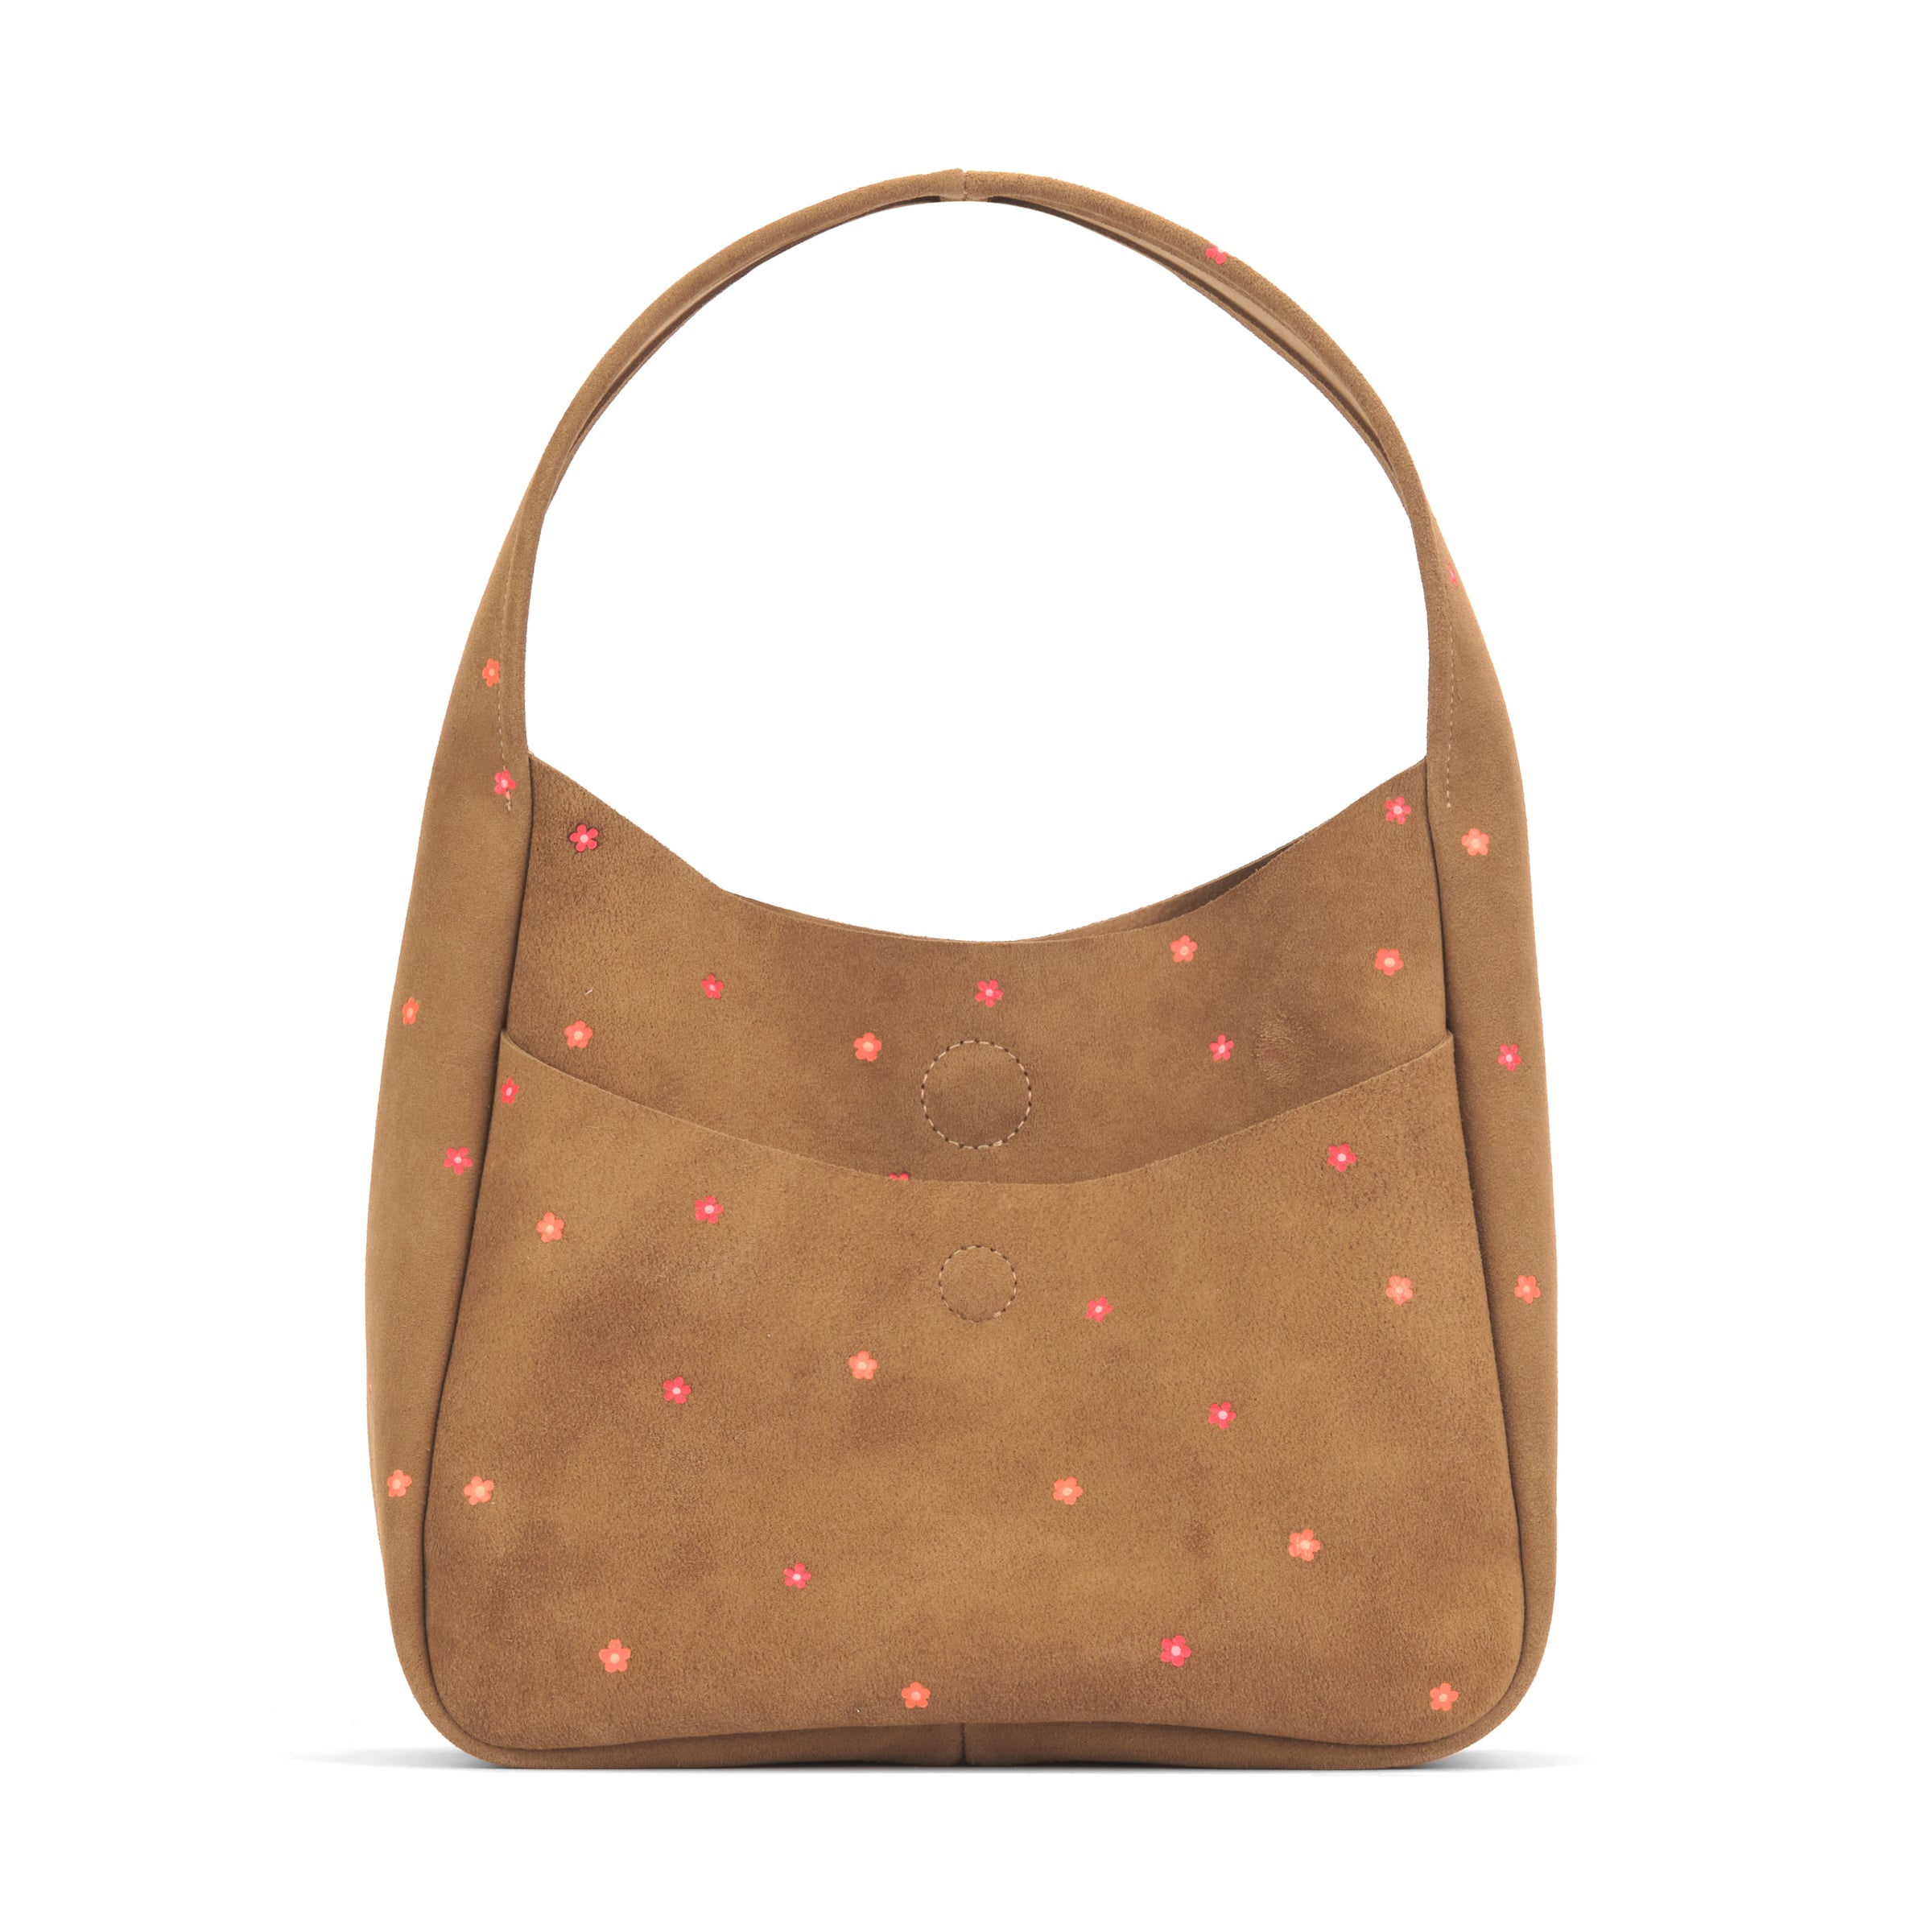 A back view of the tan Phoebe Spring 2024 Edition with hand-painted pink and orange flowers